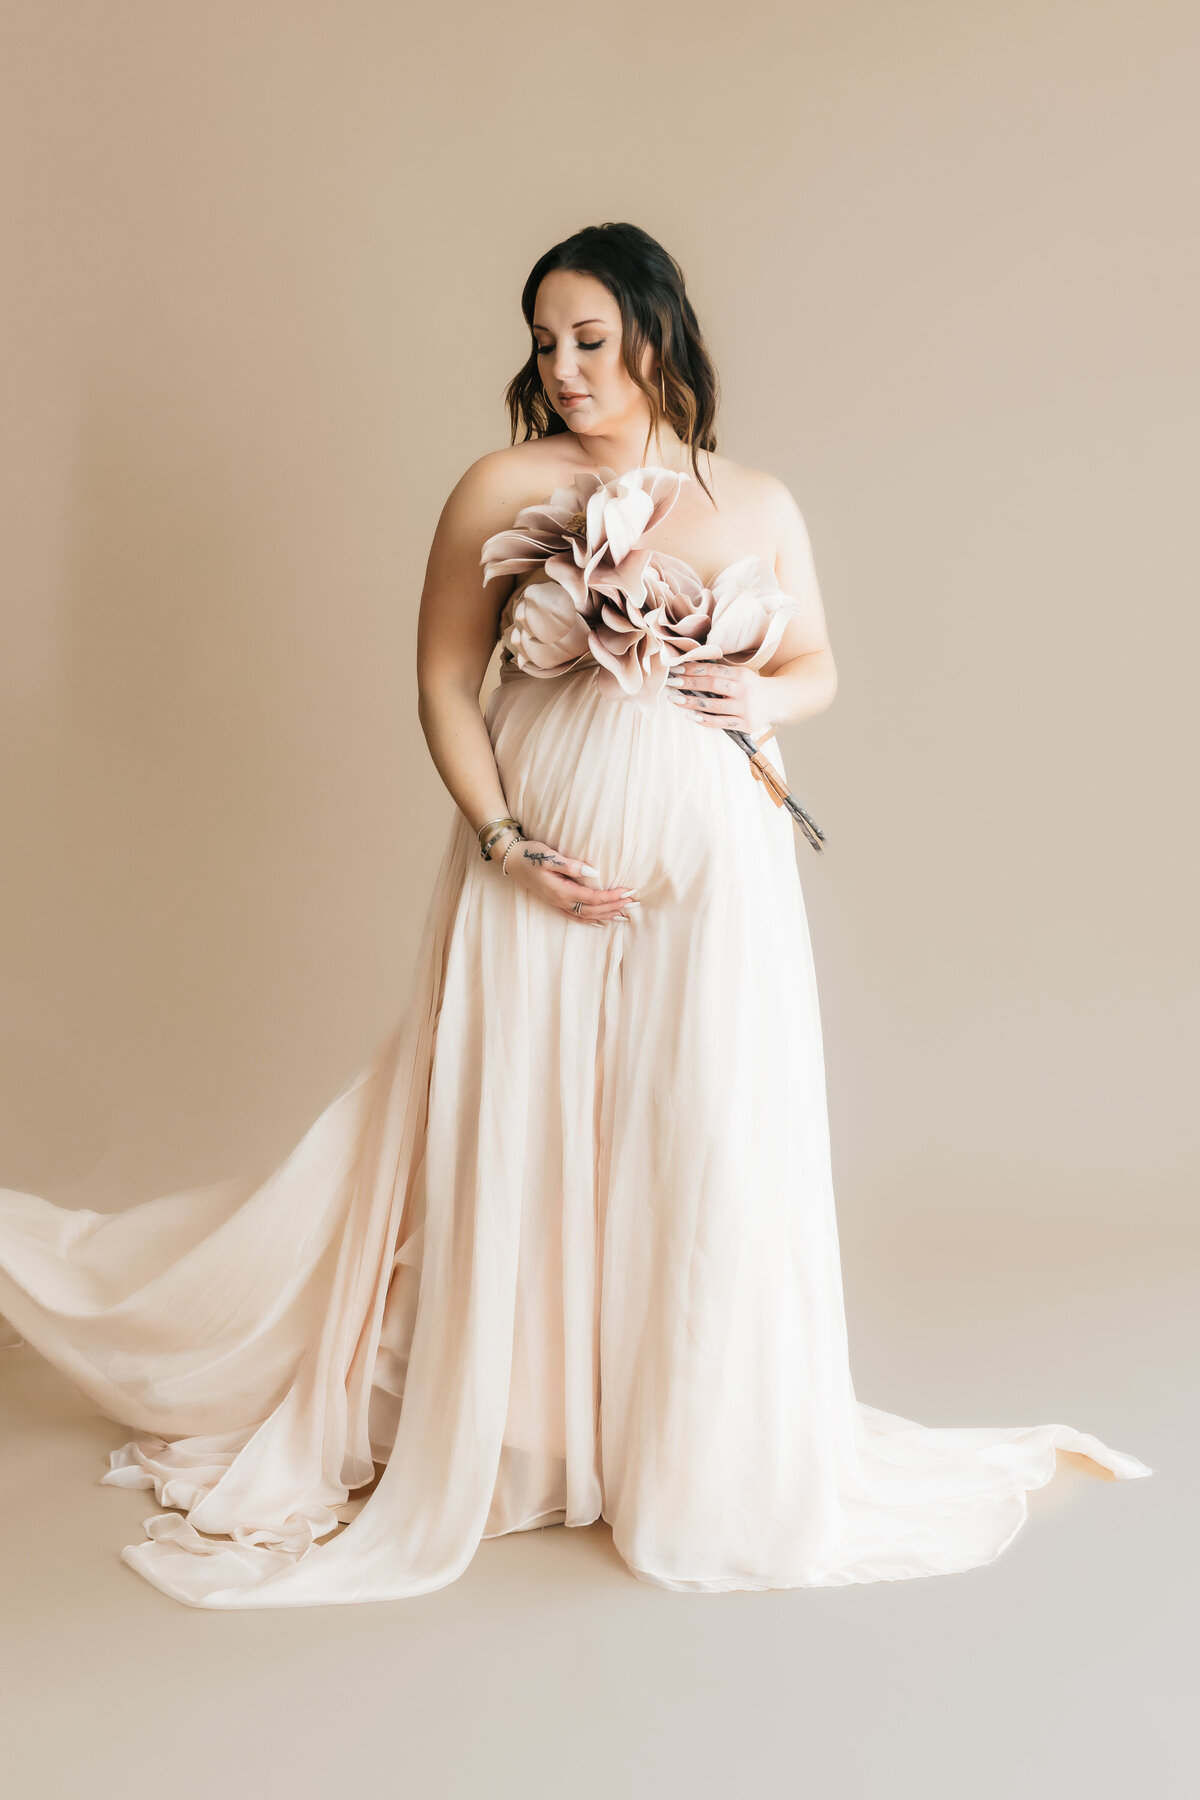 maternity mother in studio lancaster pa maternity photographer